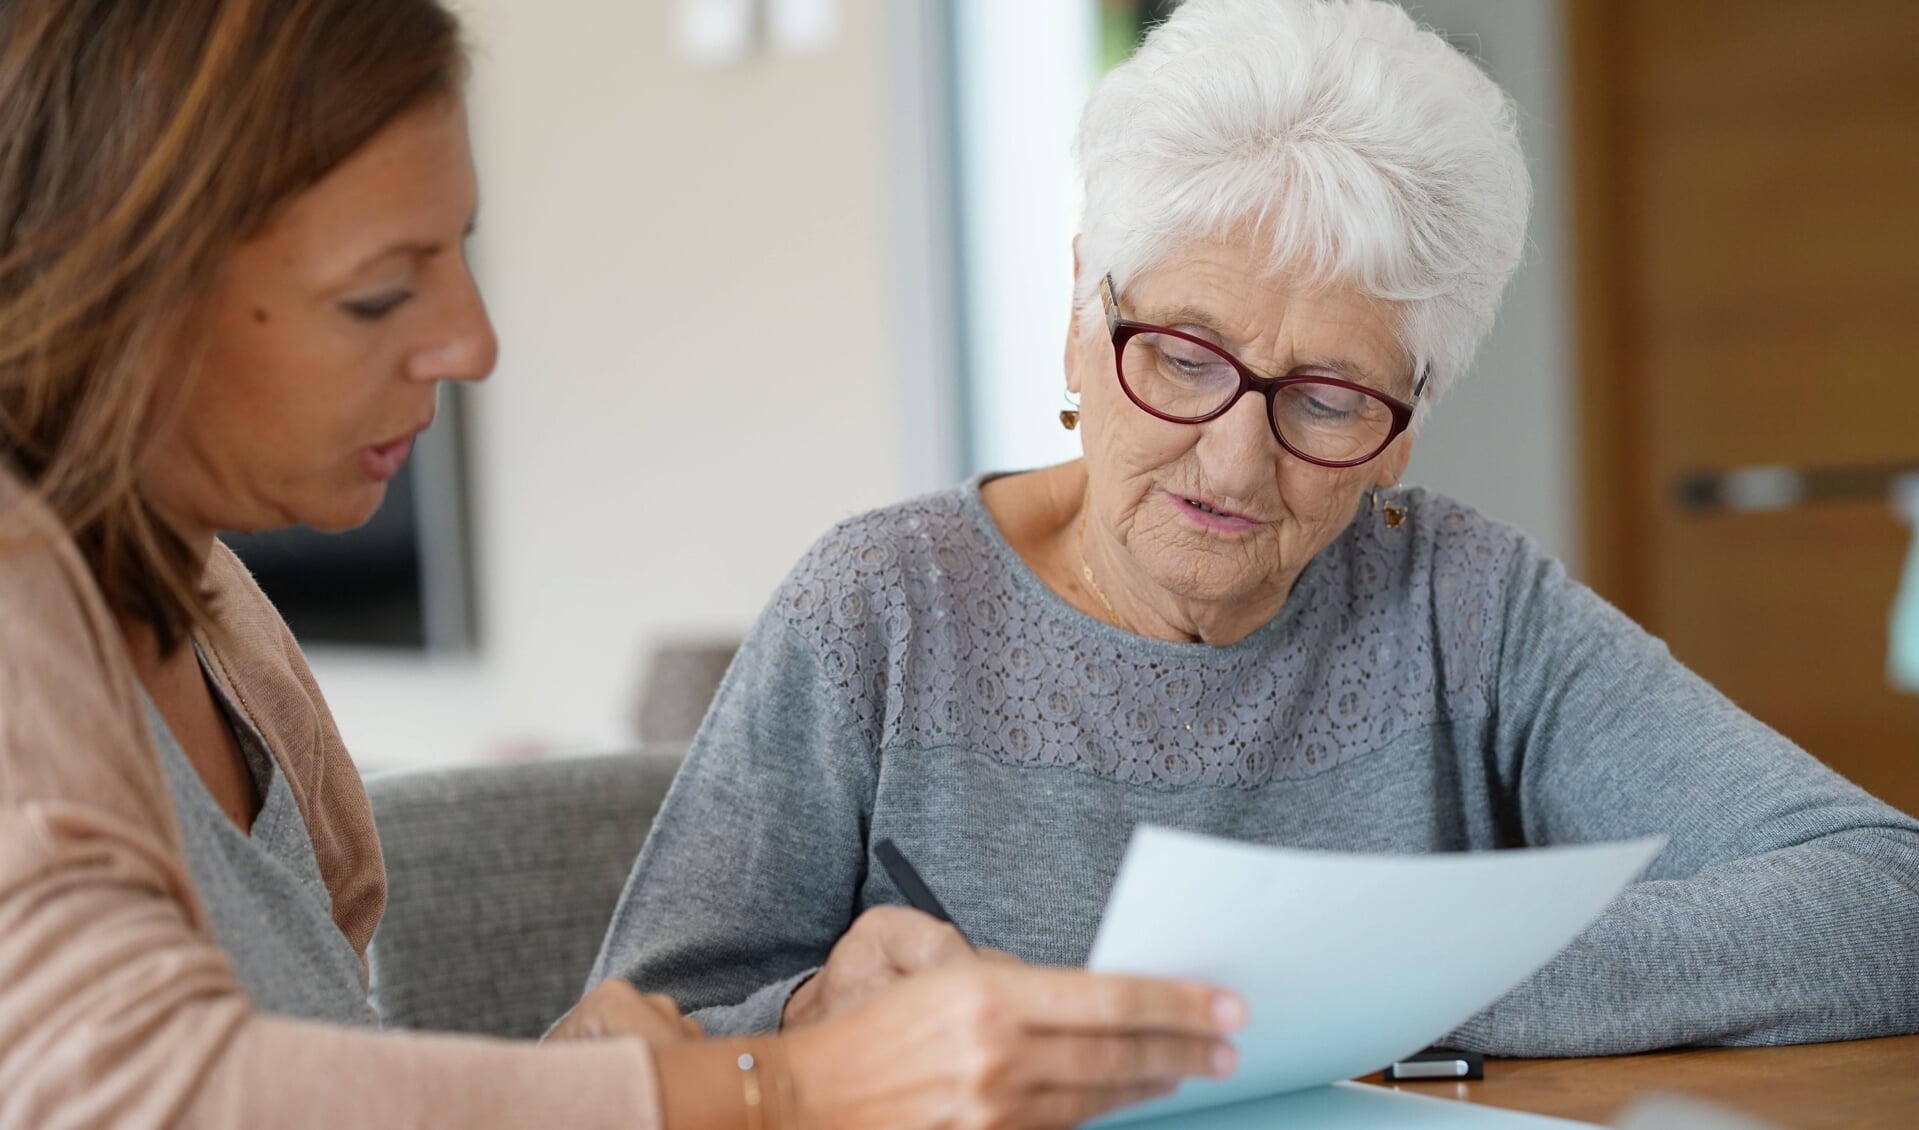 Home assistant helping elderly woman with paper work